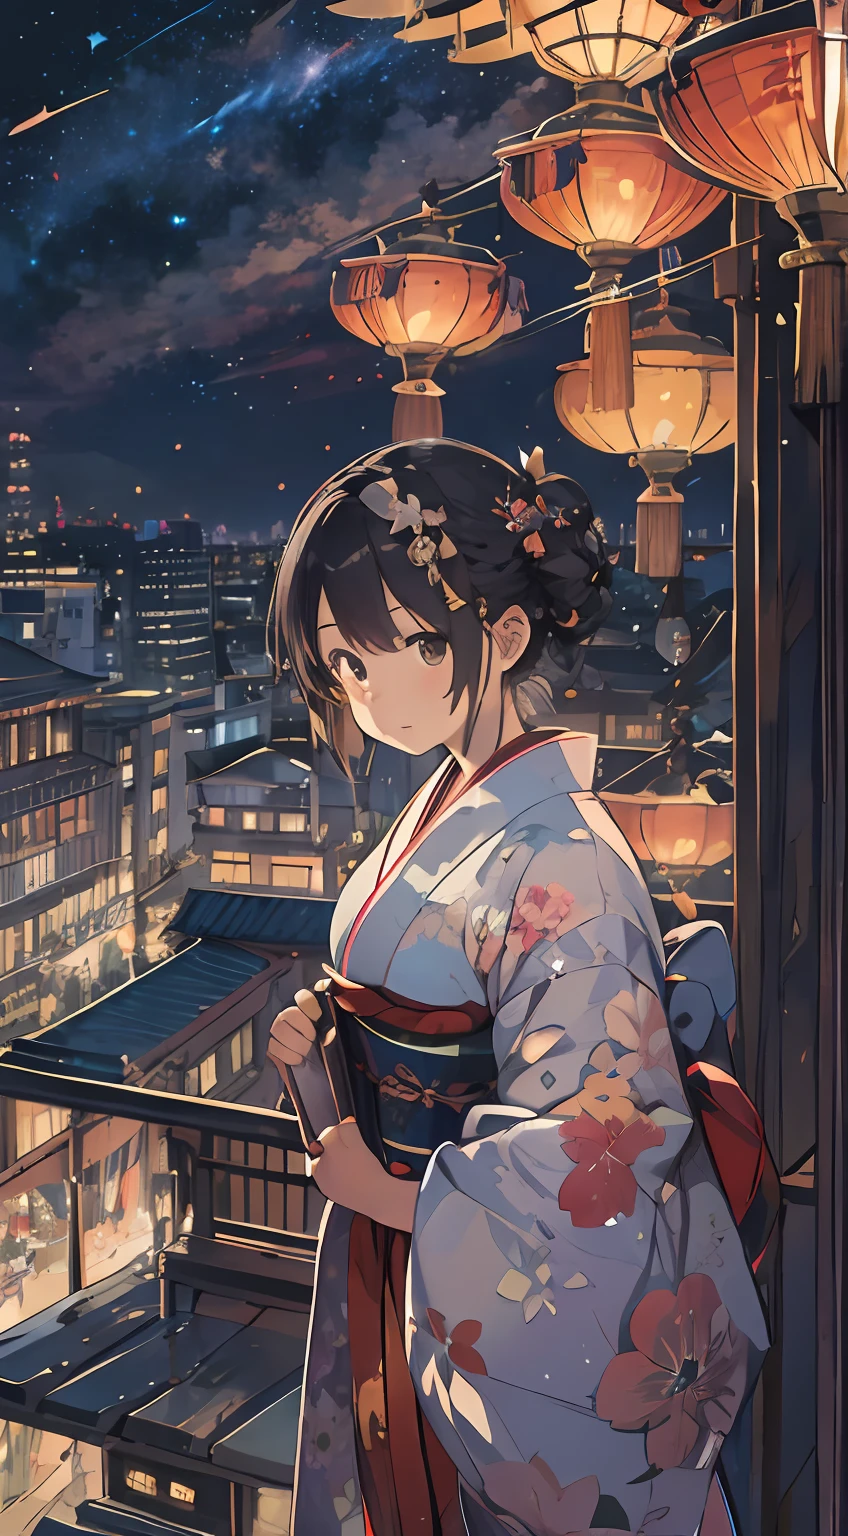 (top-quality:1.2)、(​masterpiece:1.1)、(Super detailed illustration:1.2)、From  above、
1 girl in, solo, is standing, print kimono, A darK-haired, Braiding, (East Asian Architecture:0.35), sparklers, (paper lanterns:0.55), nigh sky, urban backdrop, mont, nigh sky, Happy, stars, Soft shadows, Warm lighting, Reflectors, hair adornments, Distinct shades